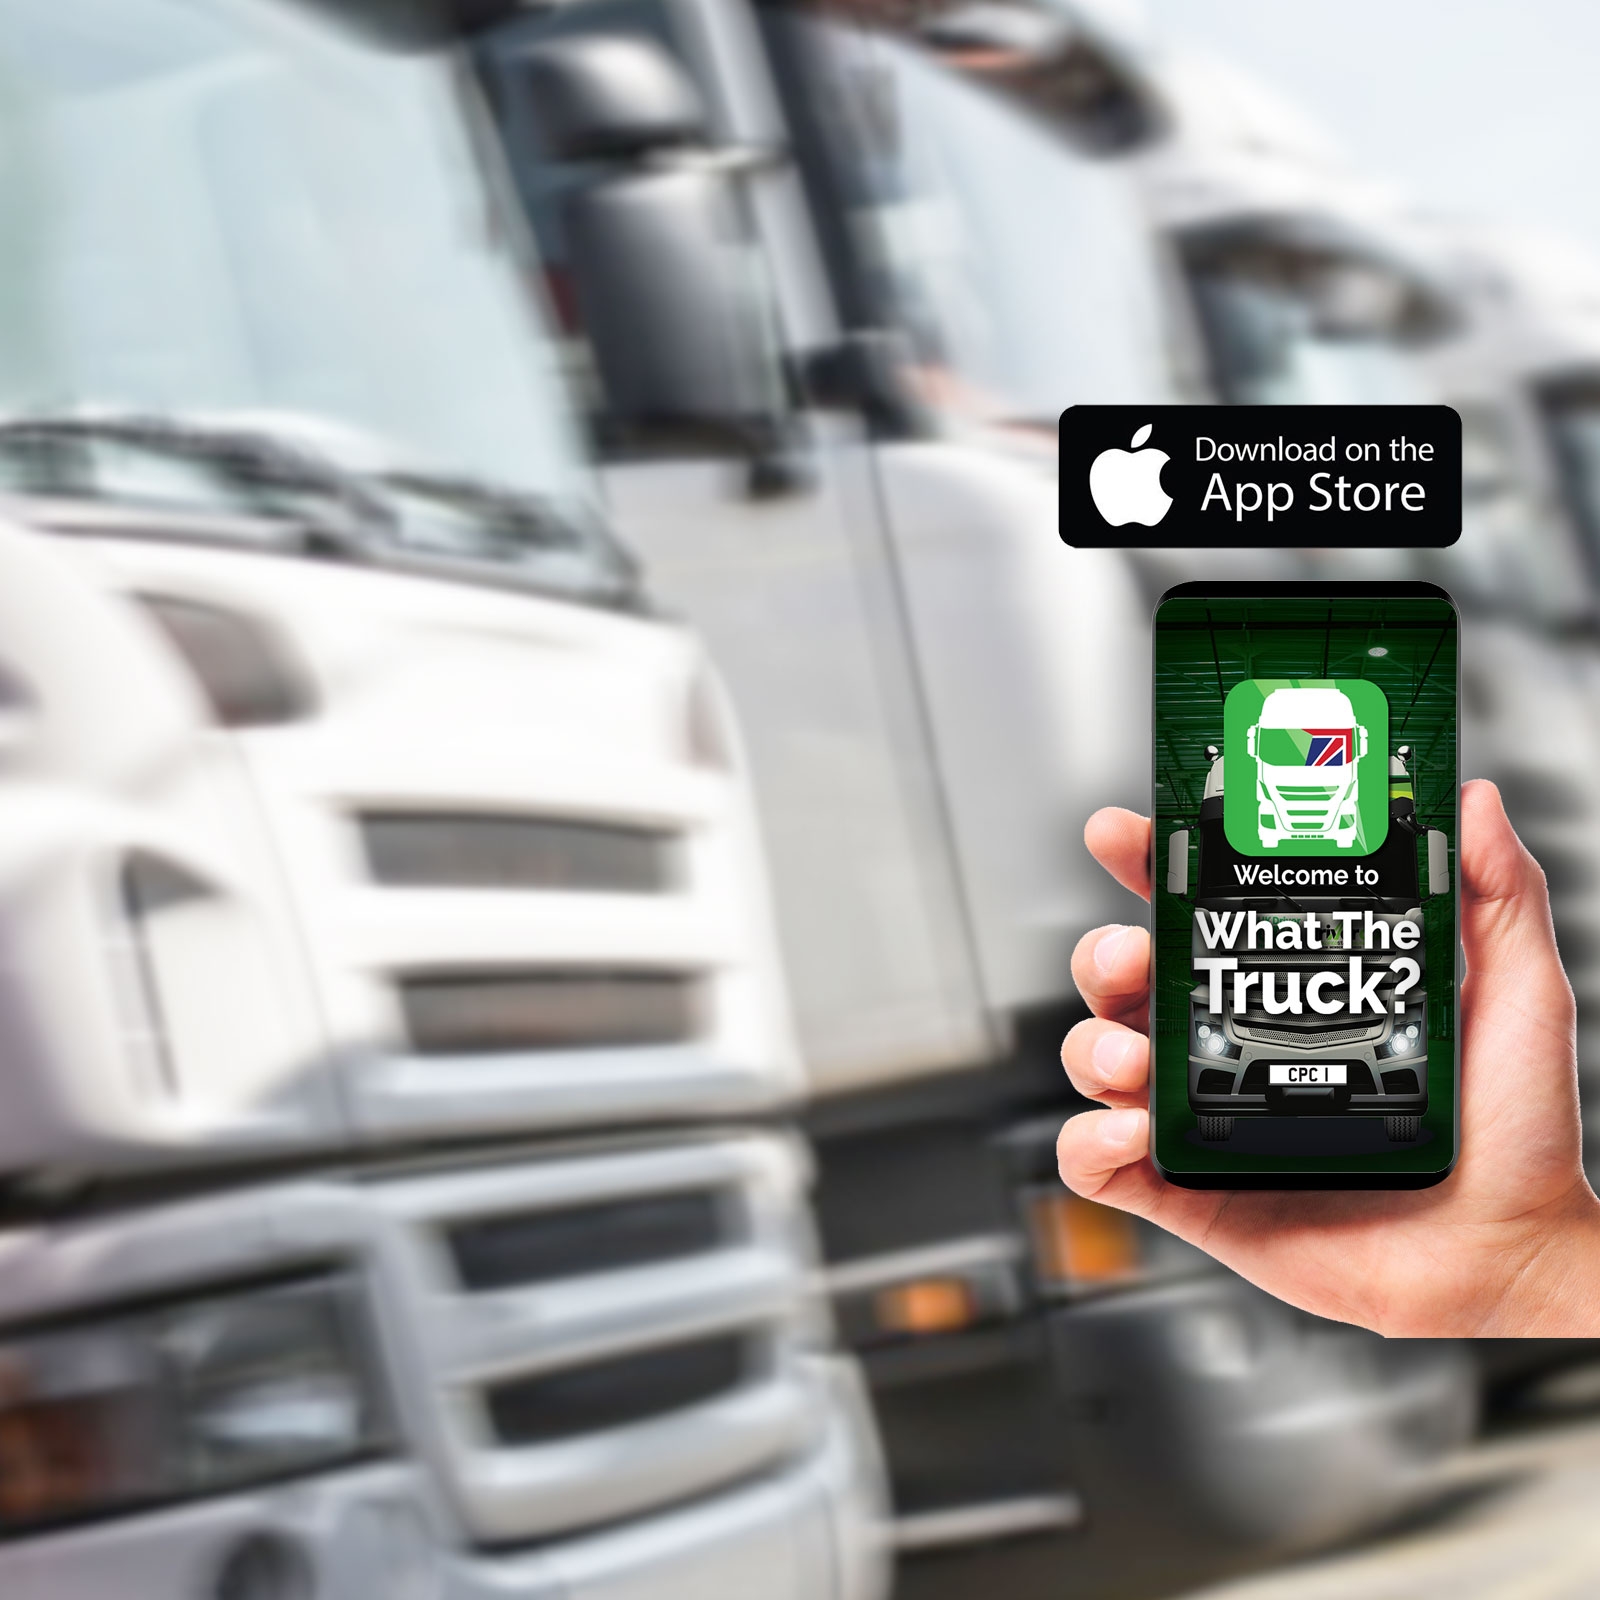 Available Now On iPhone! - Search for 'What The Truck' on App Store